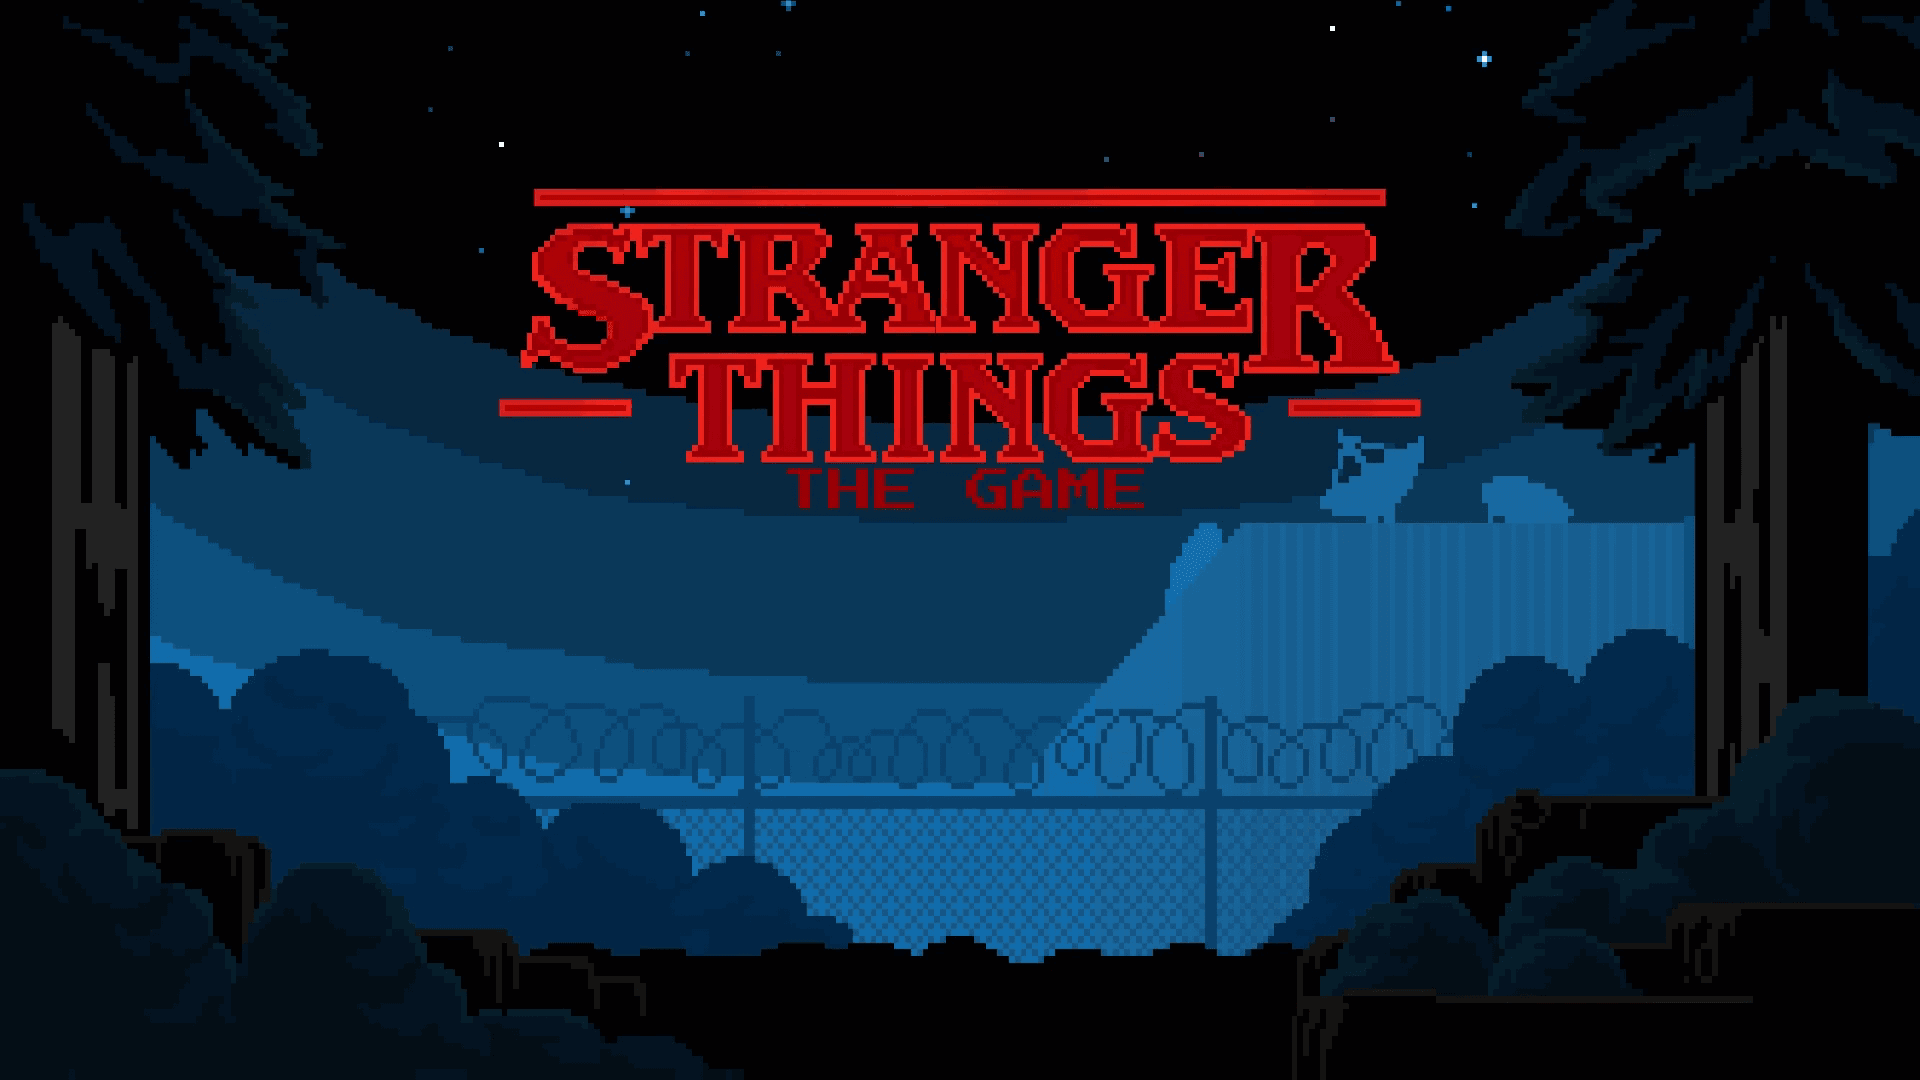 La cover di Stranger Things 3: The Game